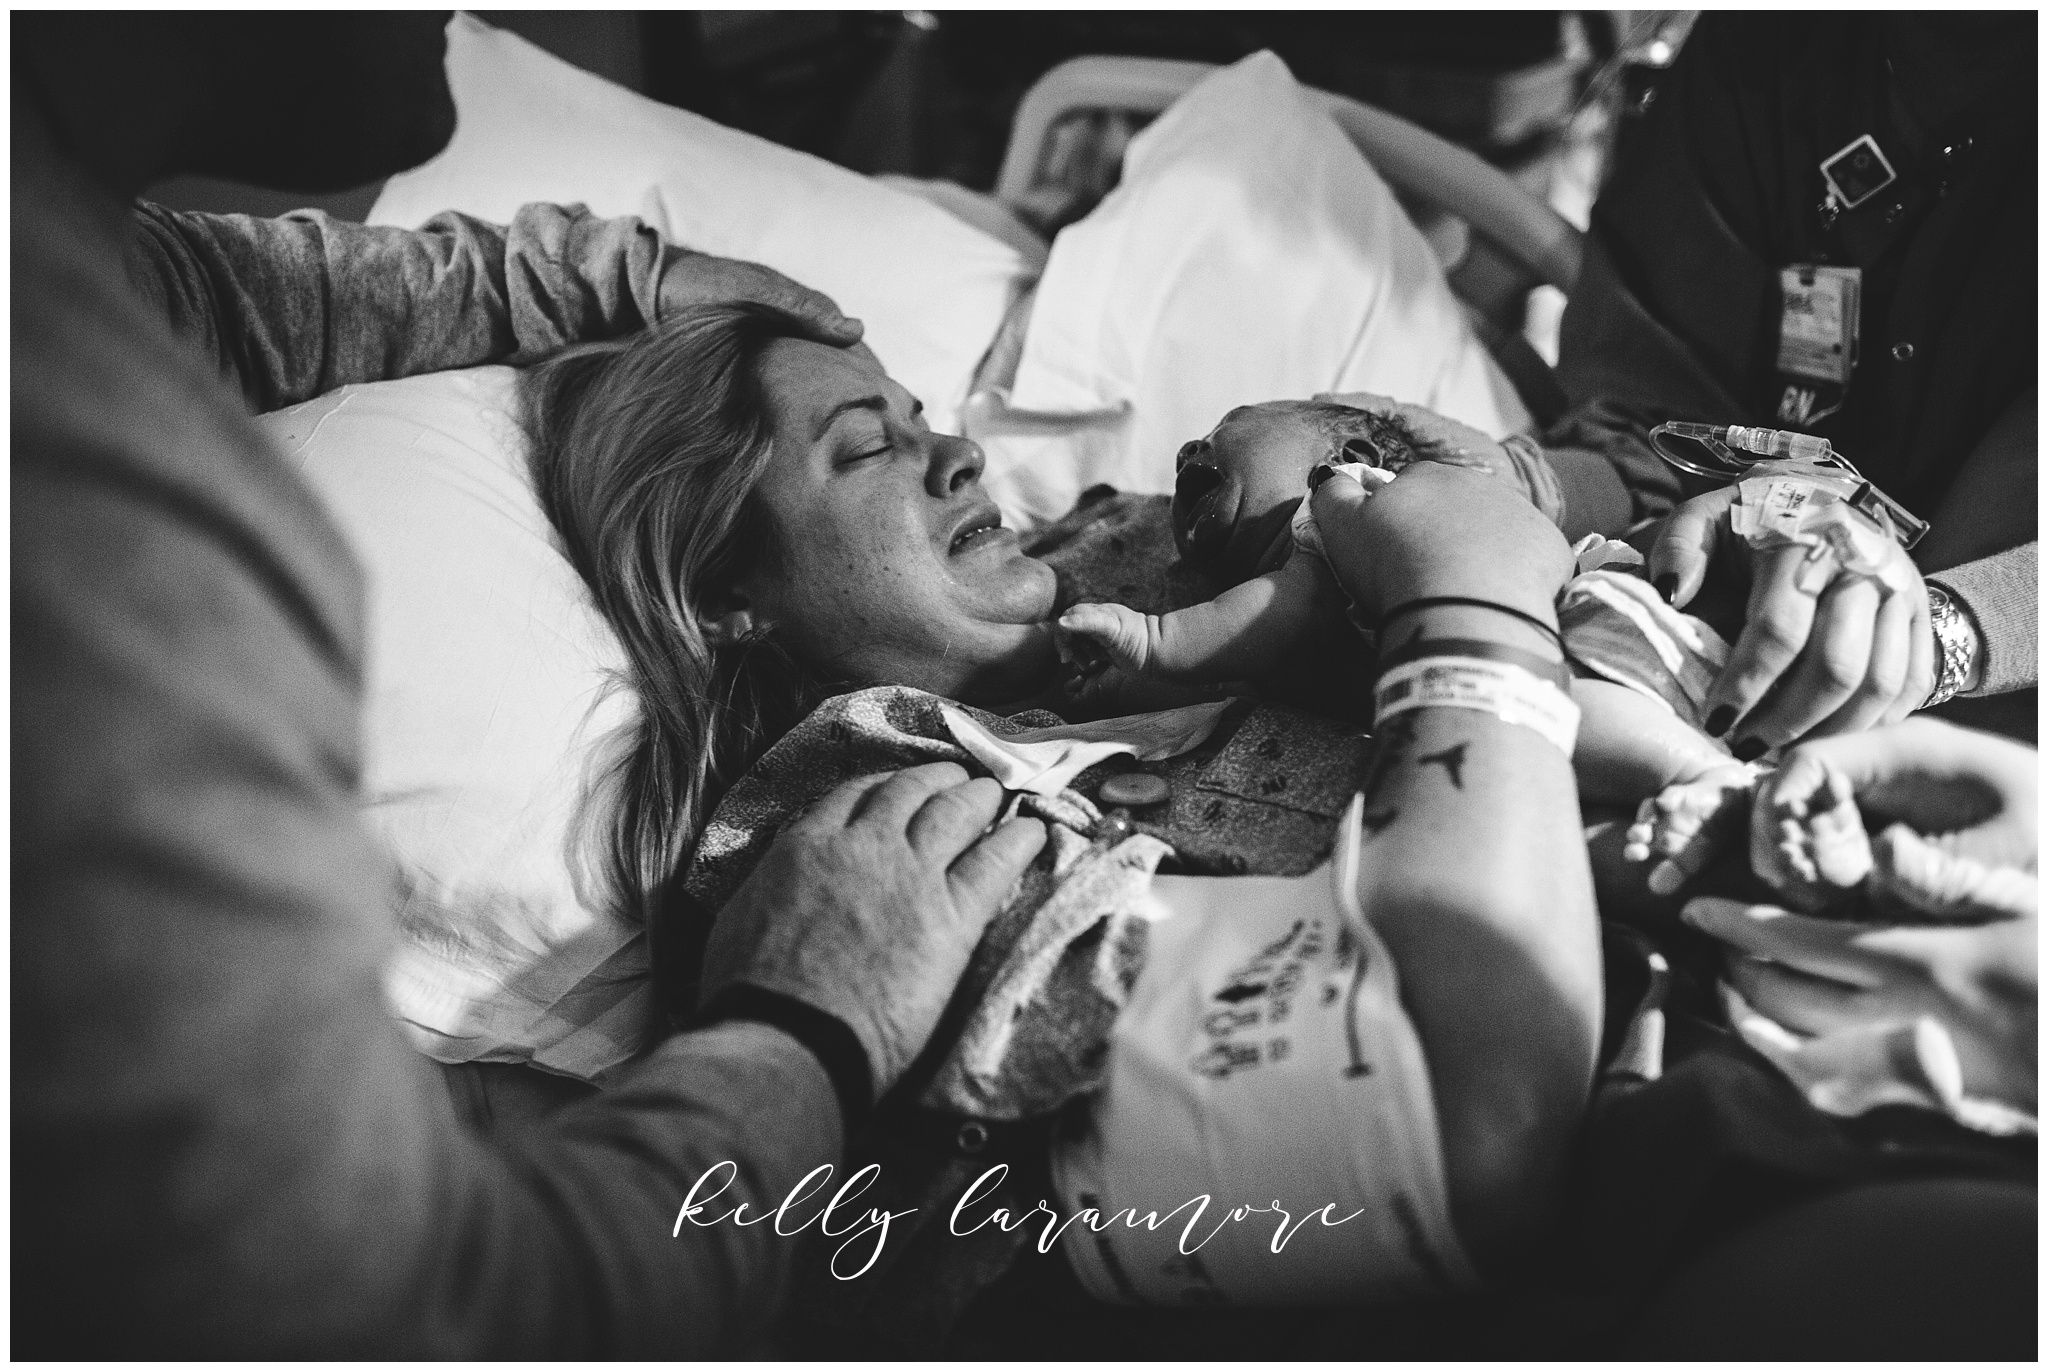 st louis birth story photographer, st louis family photographer, missouri baptist birth center-birth, delivery room, mom holding baby for first time